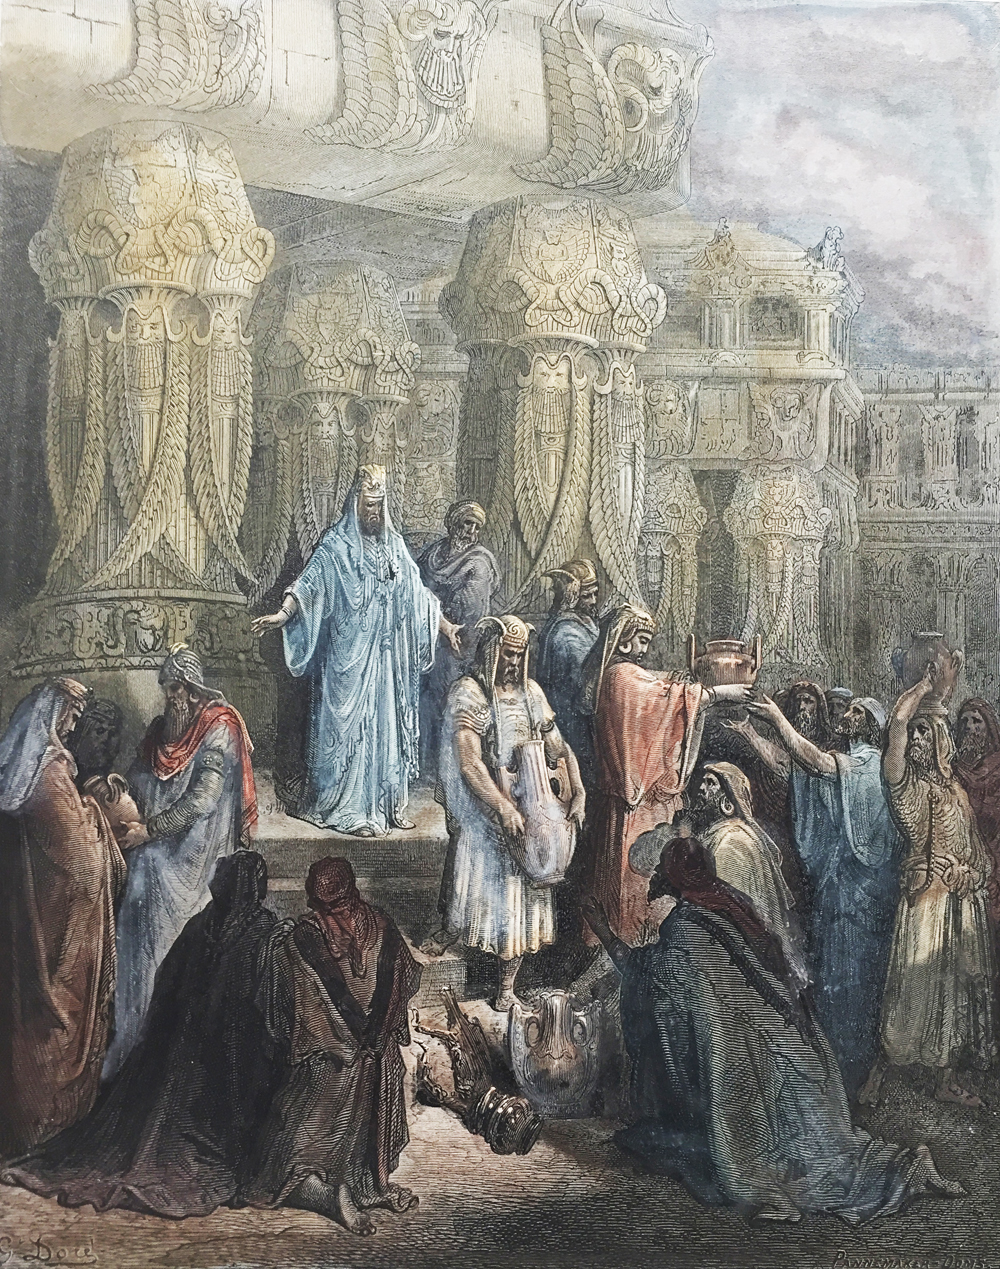 Cyrus, Nebuchadnezzar and the Temple Vessels